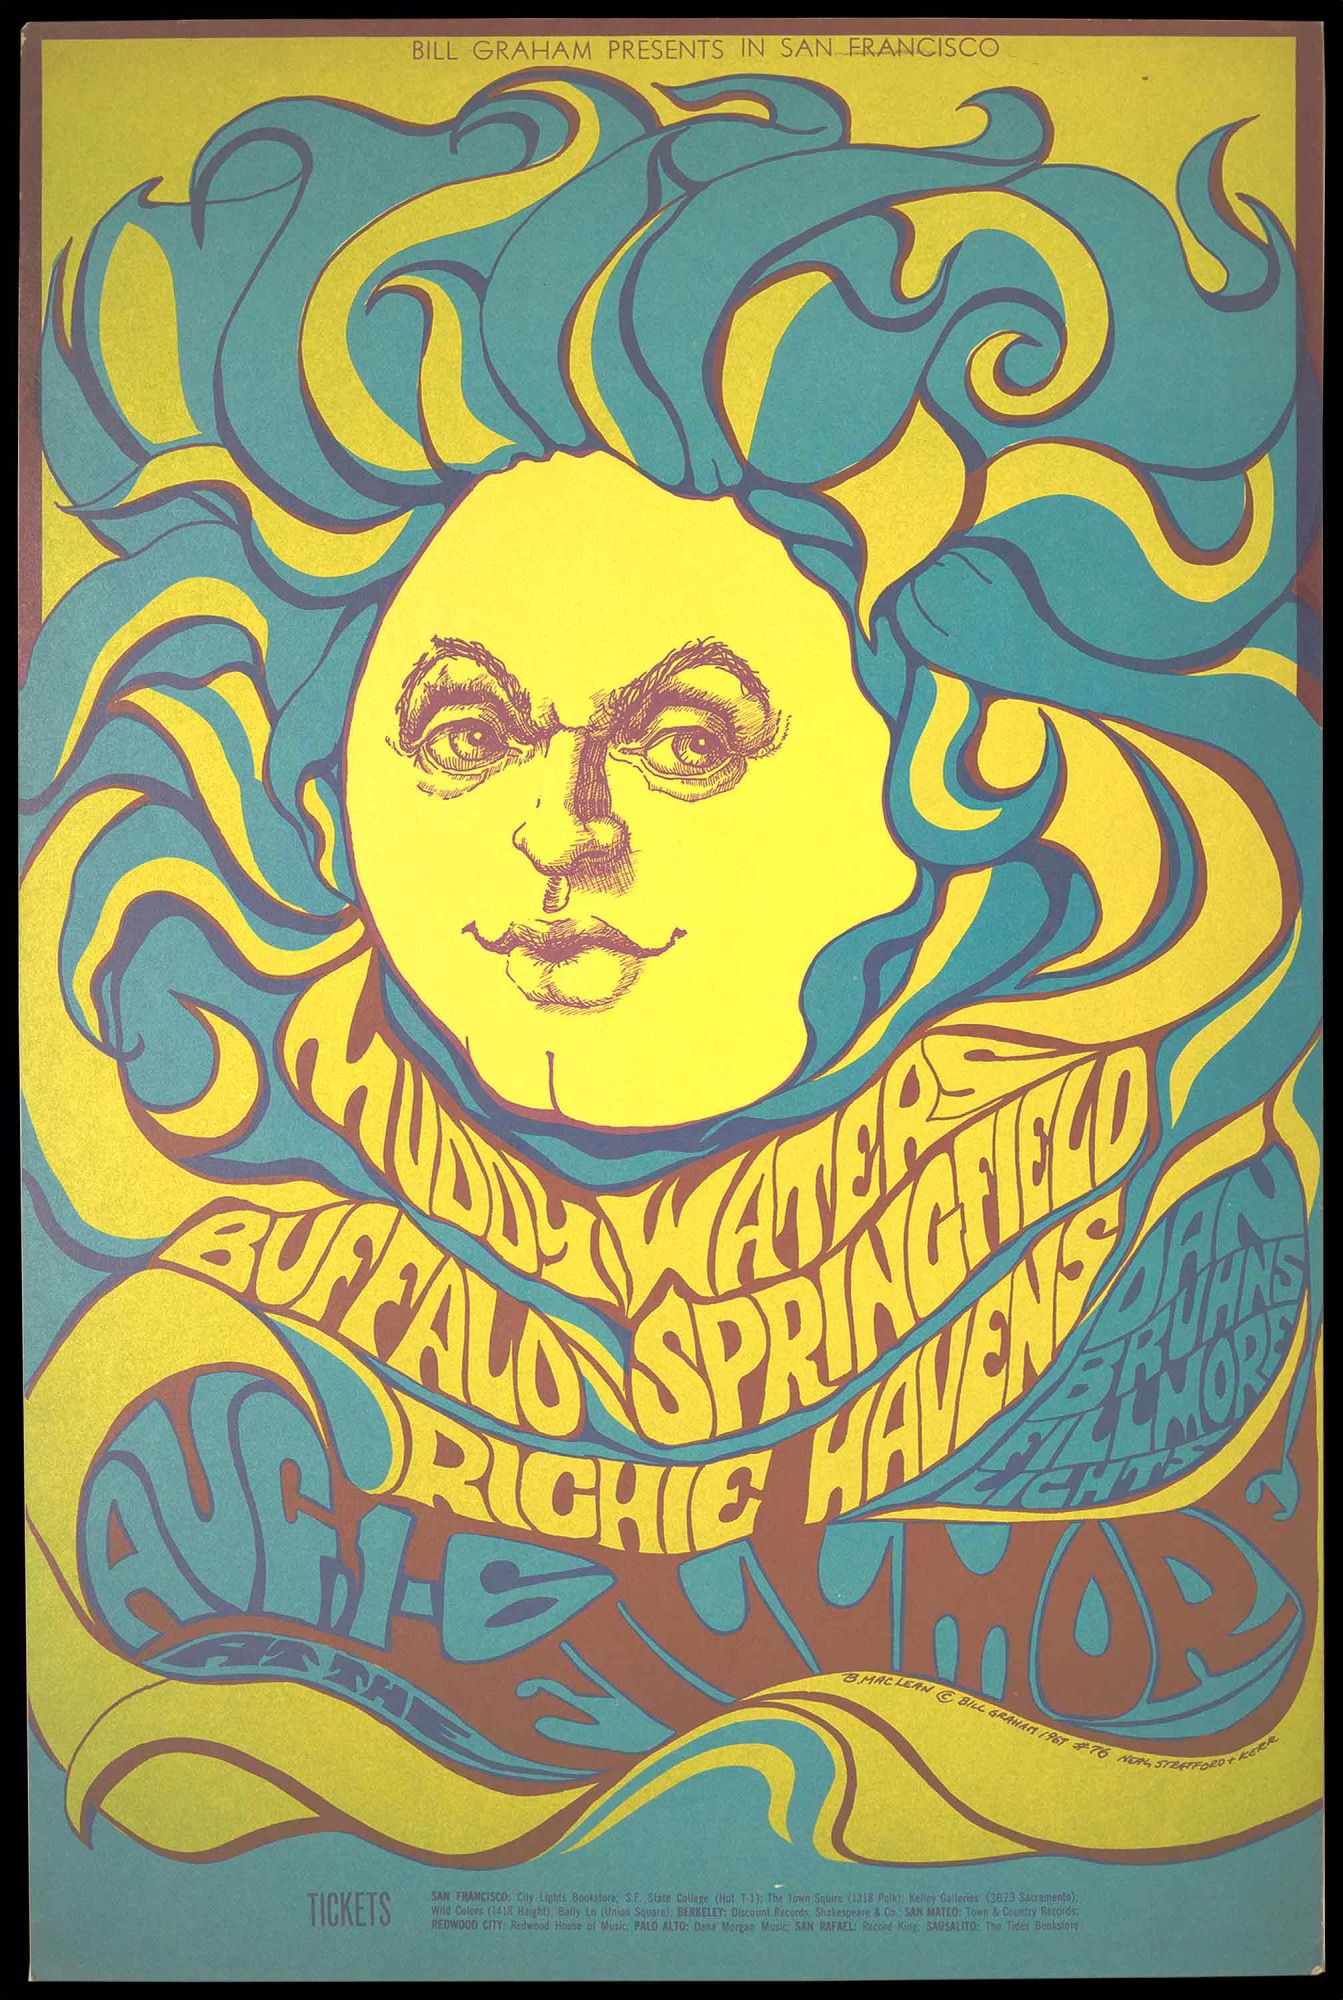 Original Concert Poster: Muddy Waters, Buffalo Springfield, Richie Havens  August 1-6, 1967 by Muddy Waters, Buffalo Springfield, Richie Havens,  Bonnie